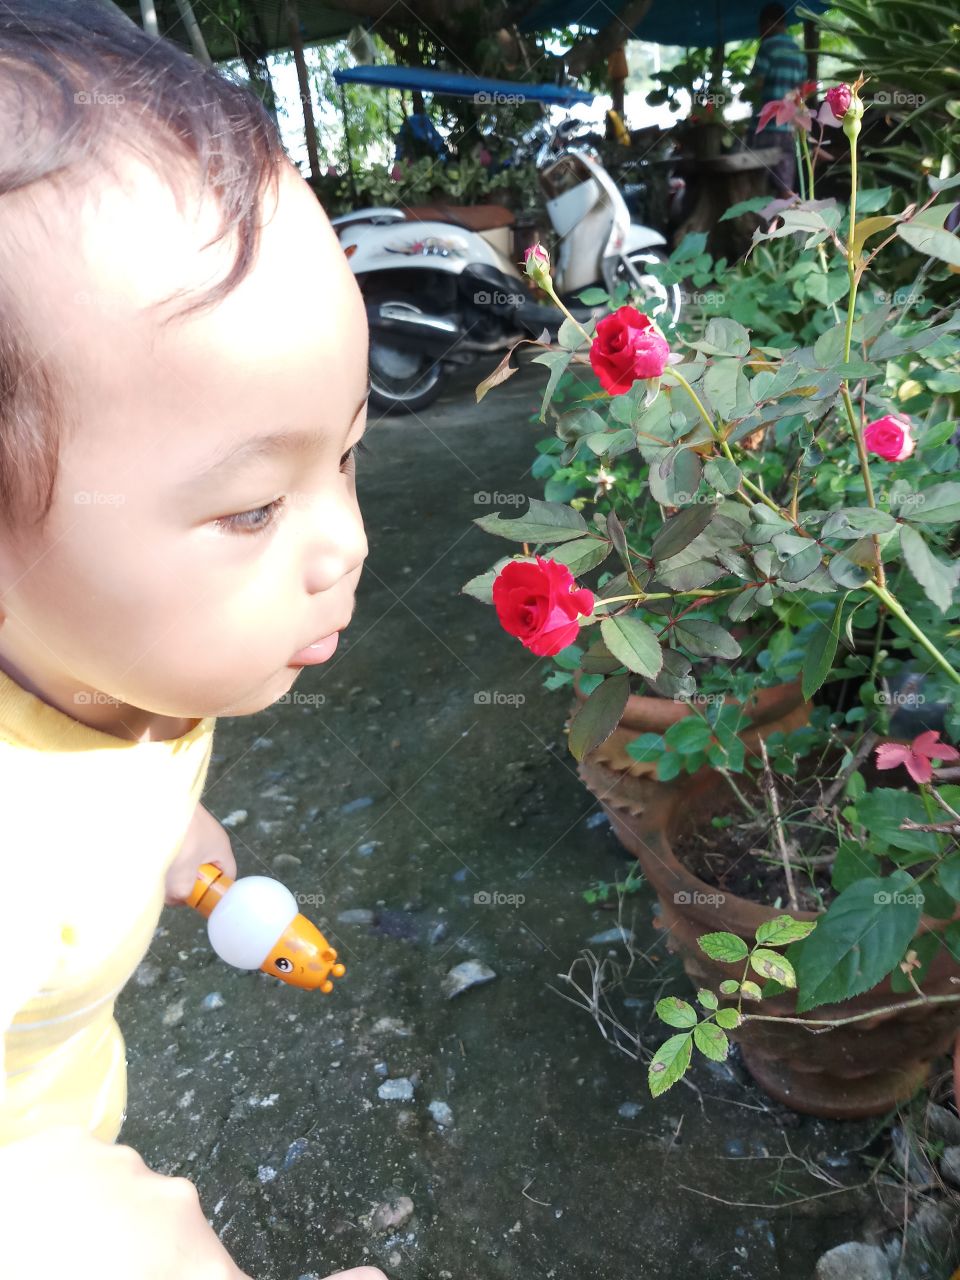 A baby boy looking at the red roses and trying to see it closer.